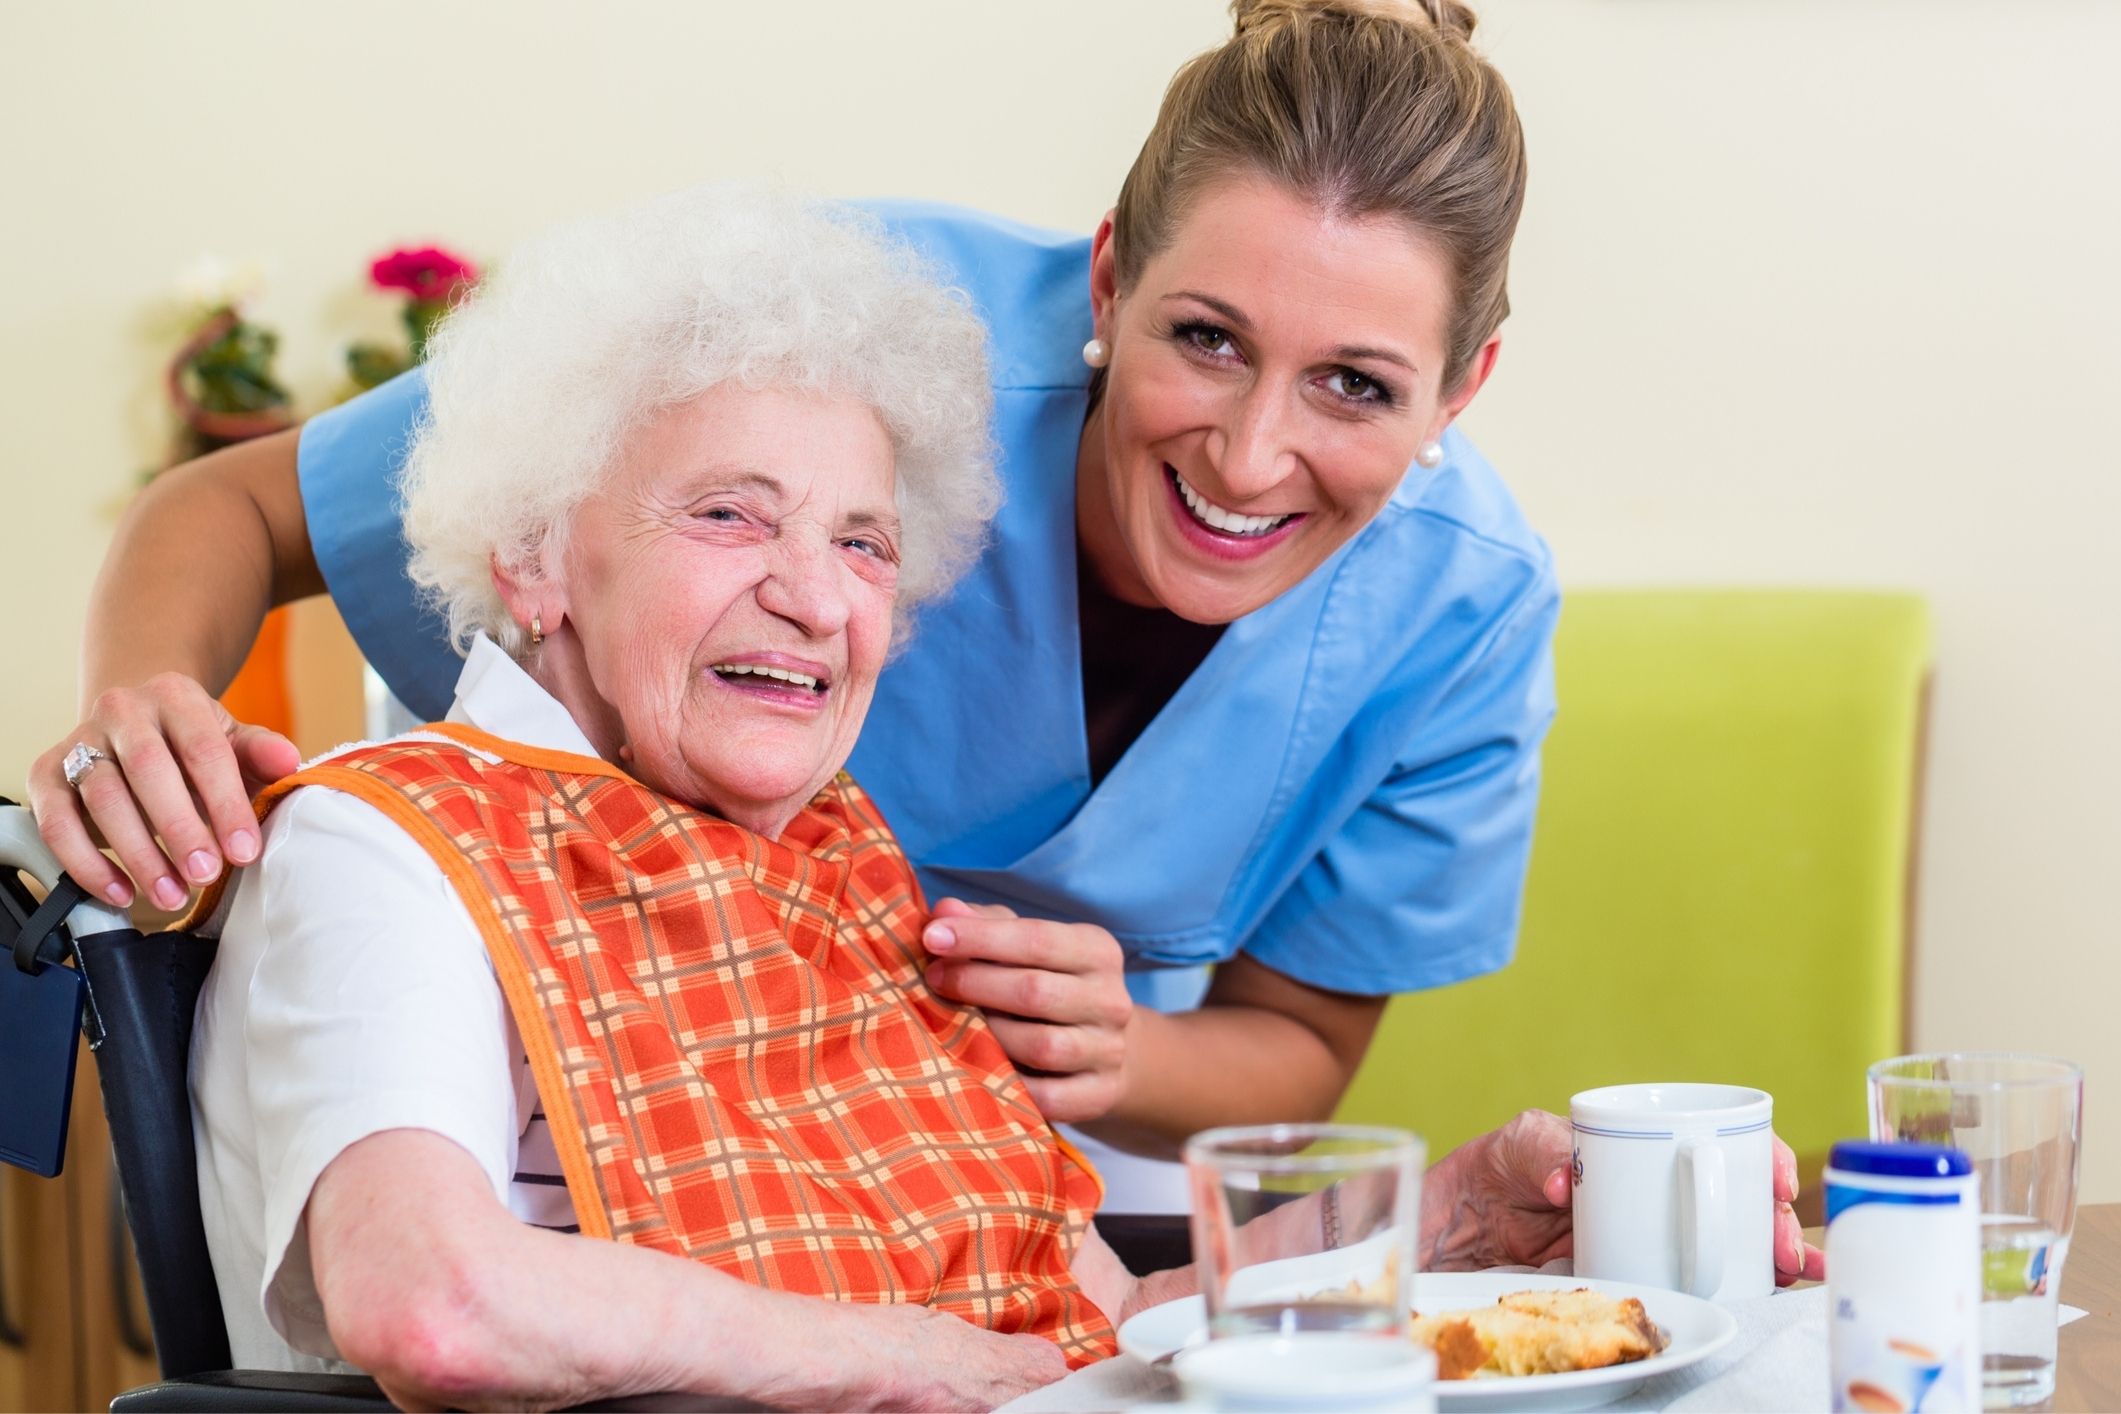 Reporting on aged care food and nutrition commences with hopes of improving care